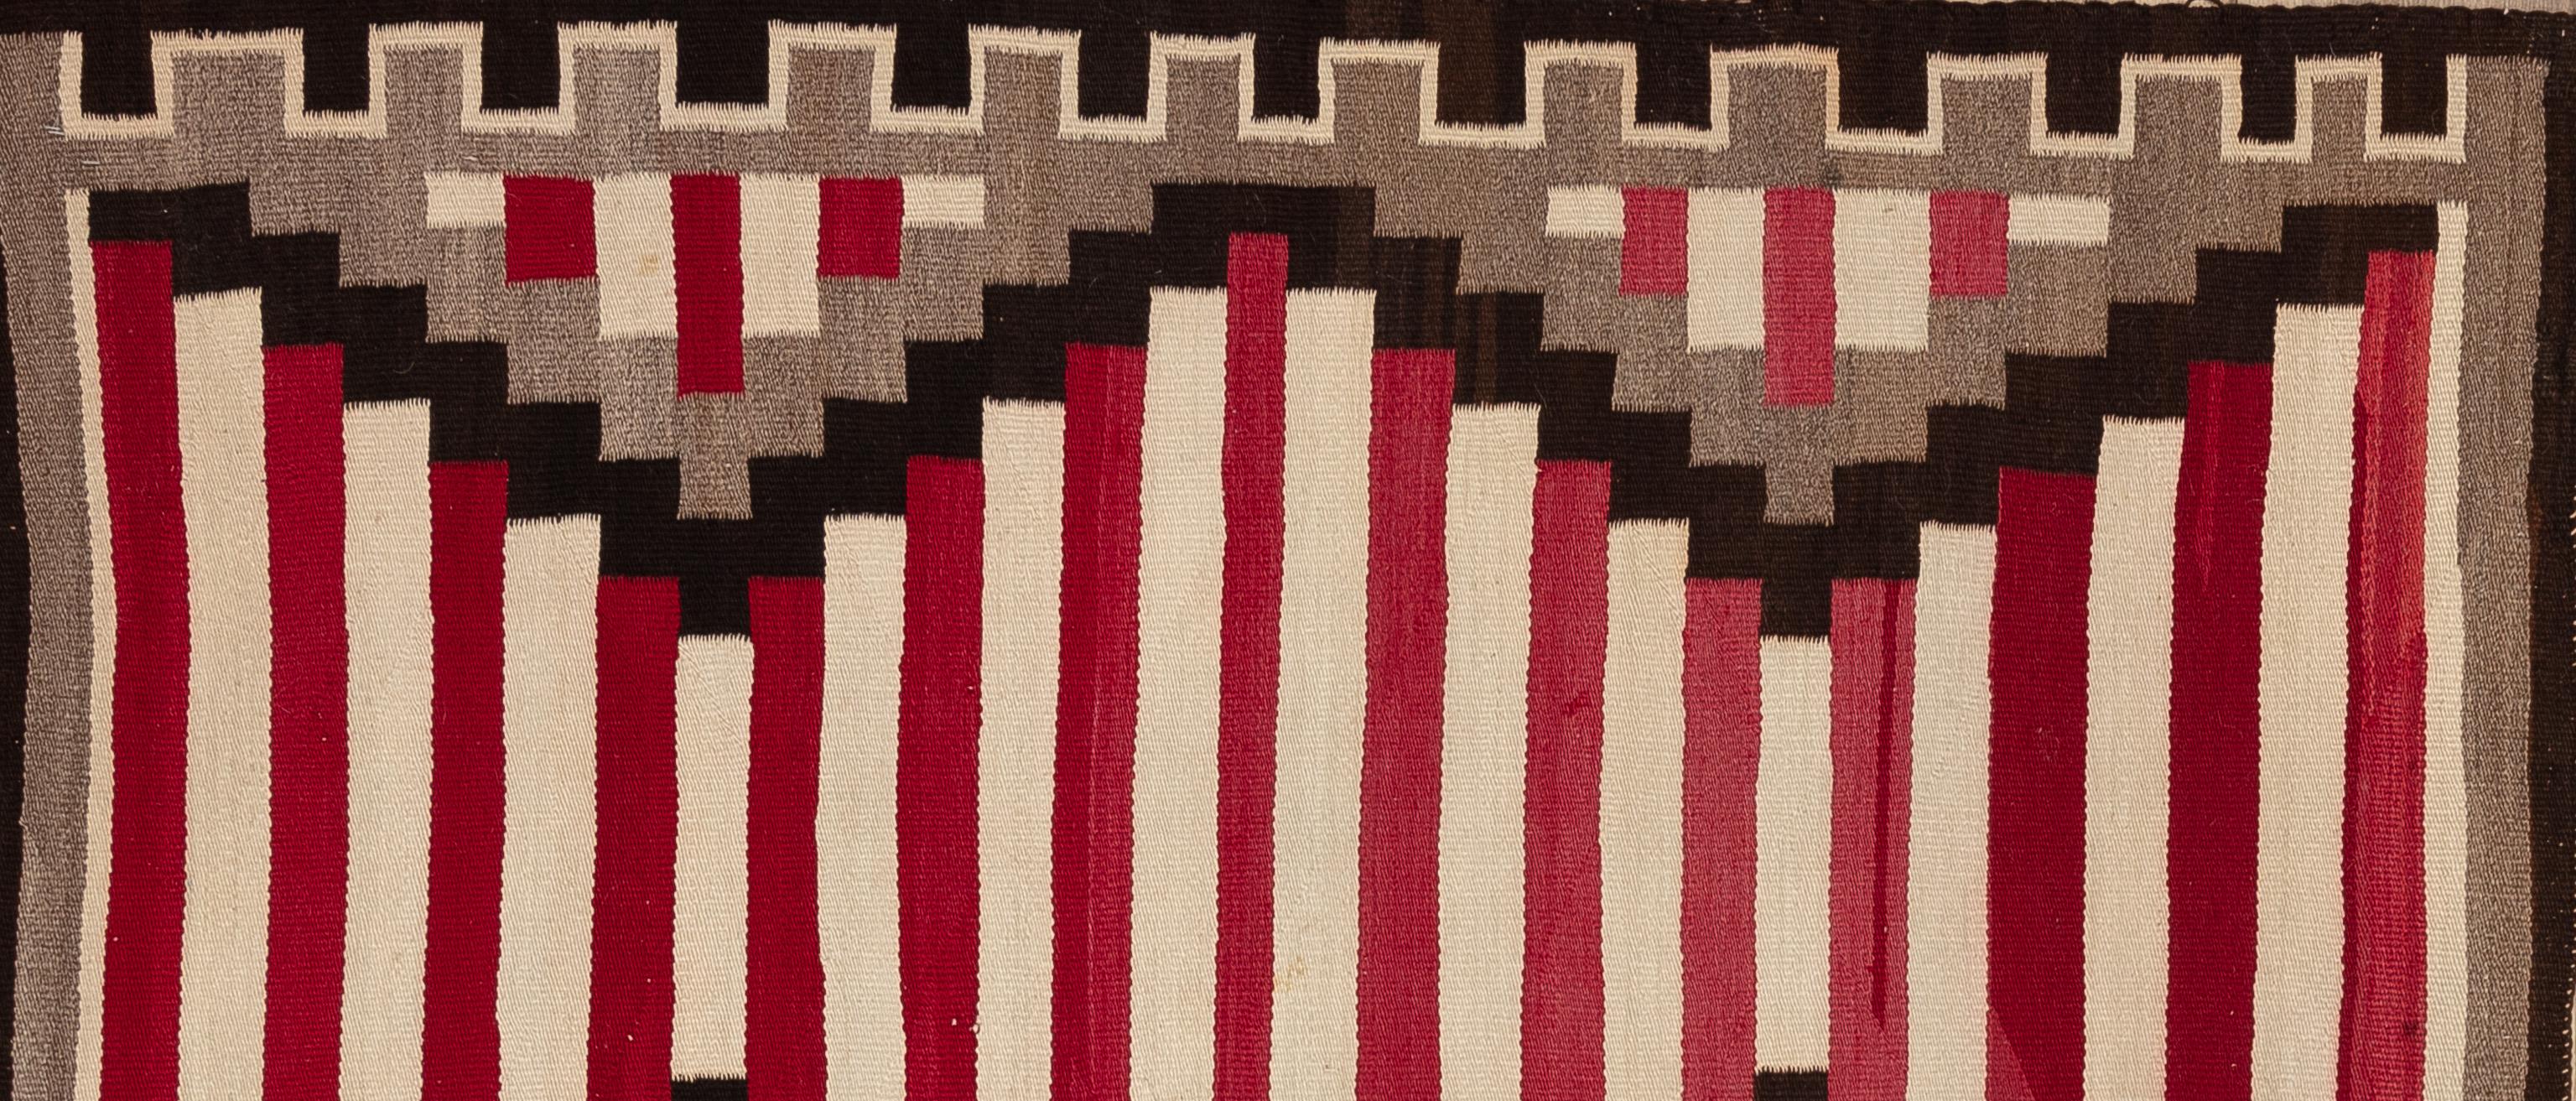 It is truly rare to find a one-of-a-kind antique that survived in the excellent condition as this rug has. The talented Navajo weaver wove this chief blanket with wool yarns that were dyed with aniline dyes, natural dyes, and natural fleece colors.